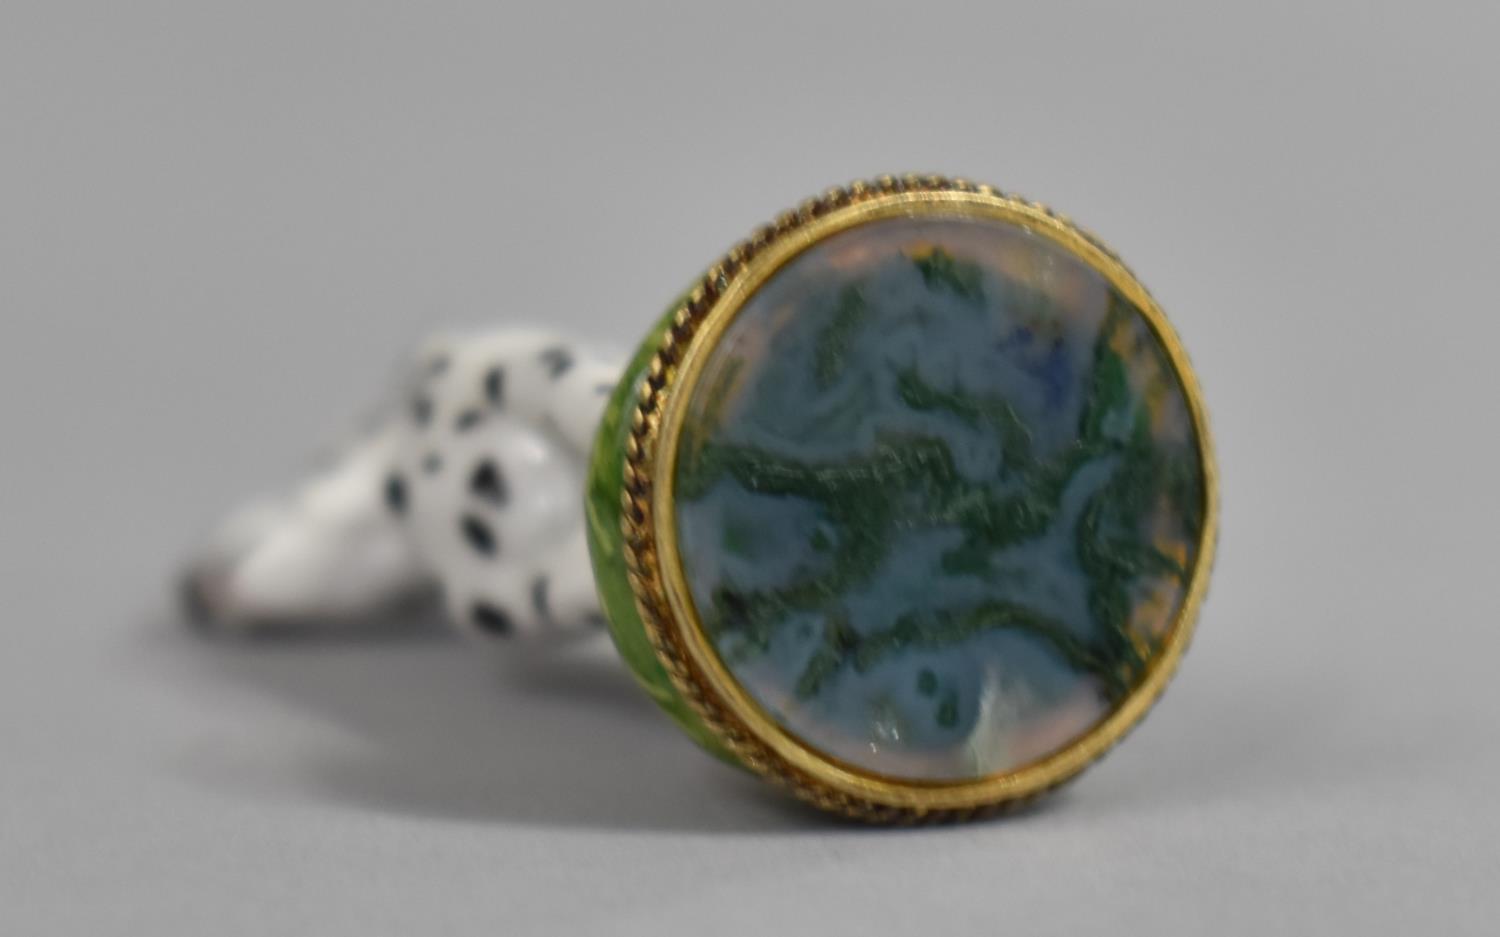 A Halcyon Days Enamel Seal, Modelled as a Dalmatian with Agate Stone - Image 3 of 3